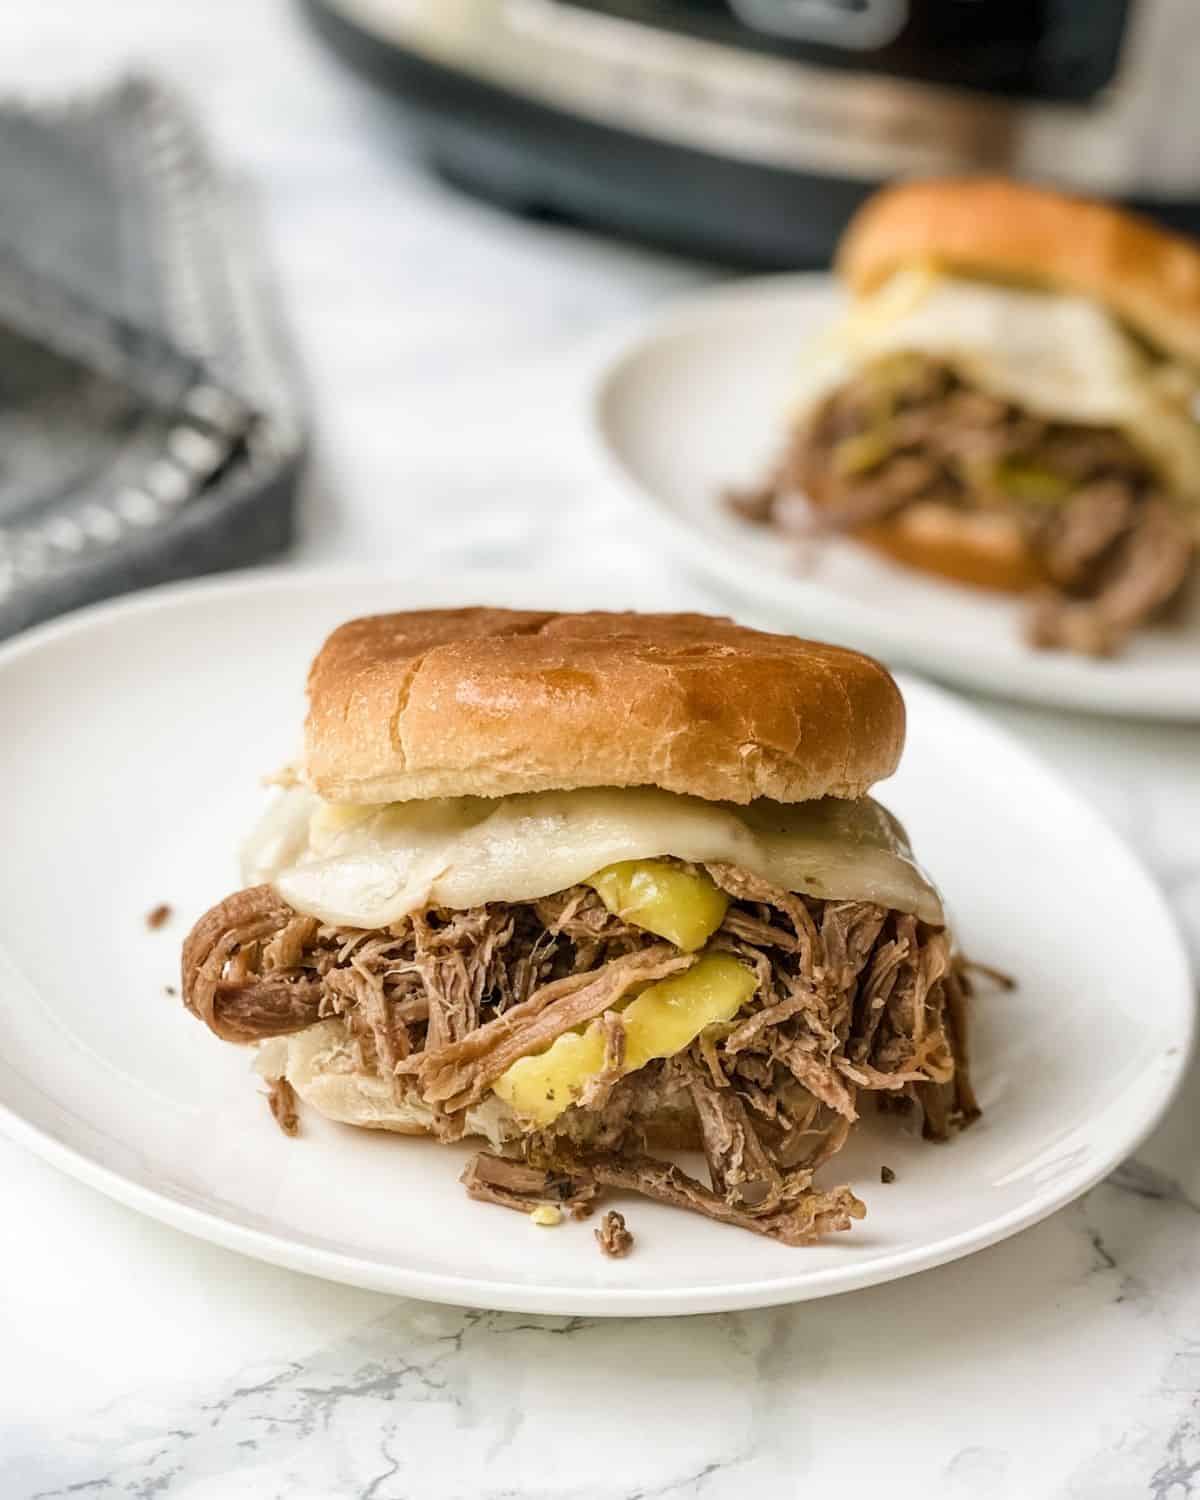 A closeup picture of the italian shredded beef on a roll with cheese. There's another sandwich behind it with the slow cooker next to it.